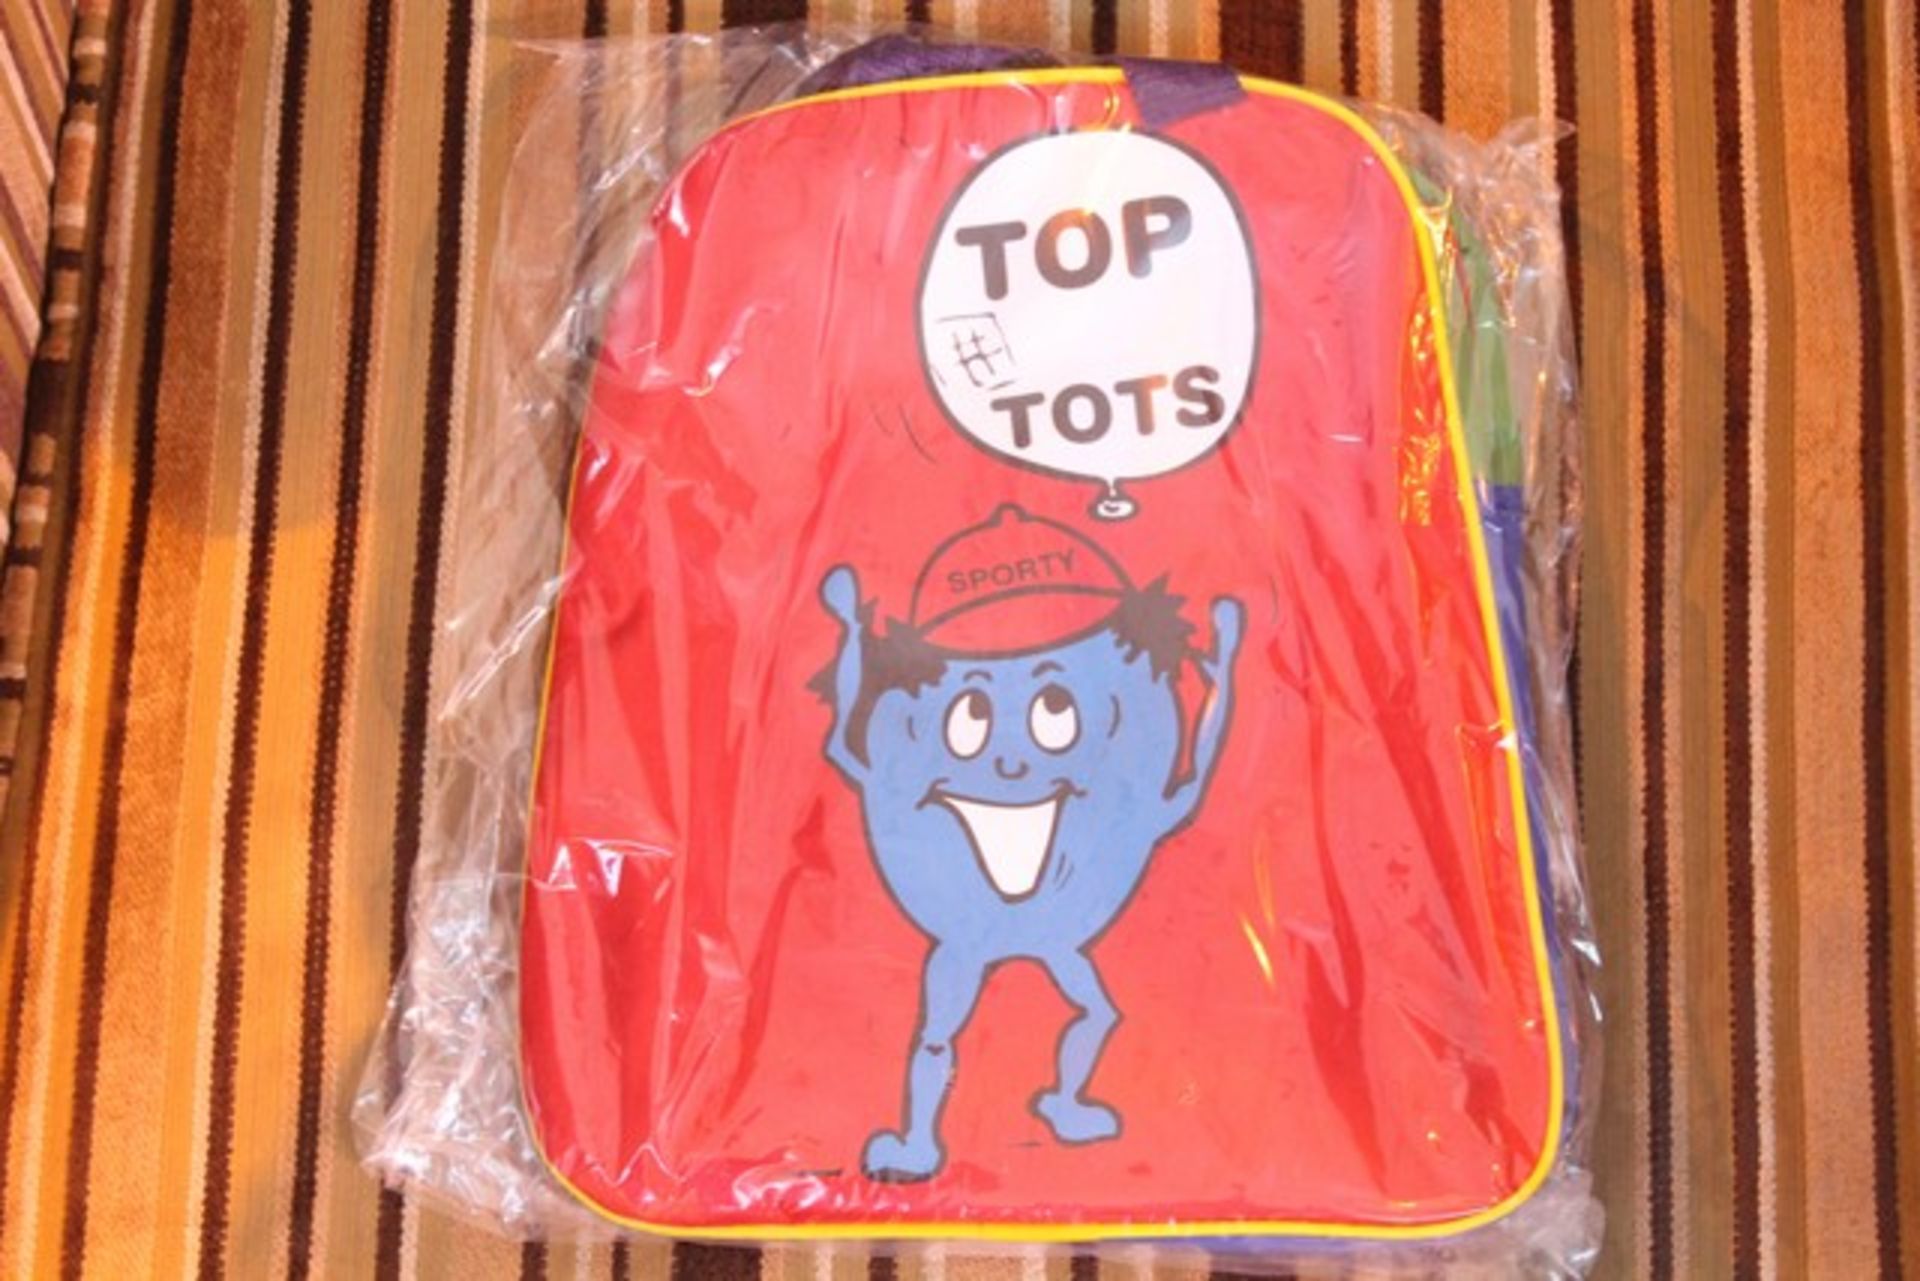 5 x TOP TOTS BACK PACKS   *Please note that the bid price is multiplied by the number of items in